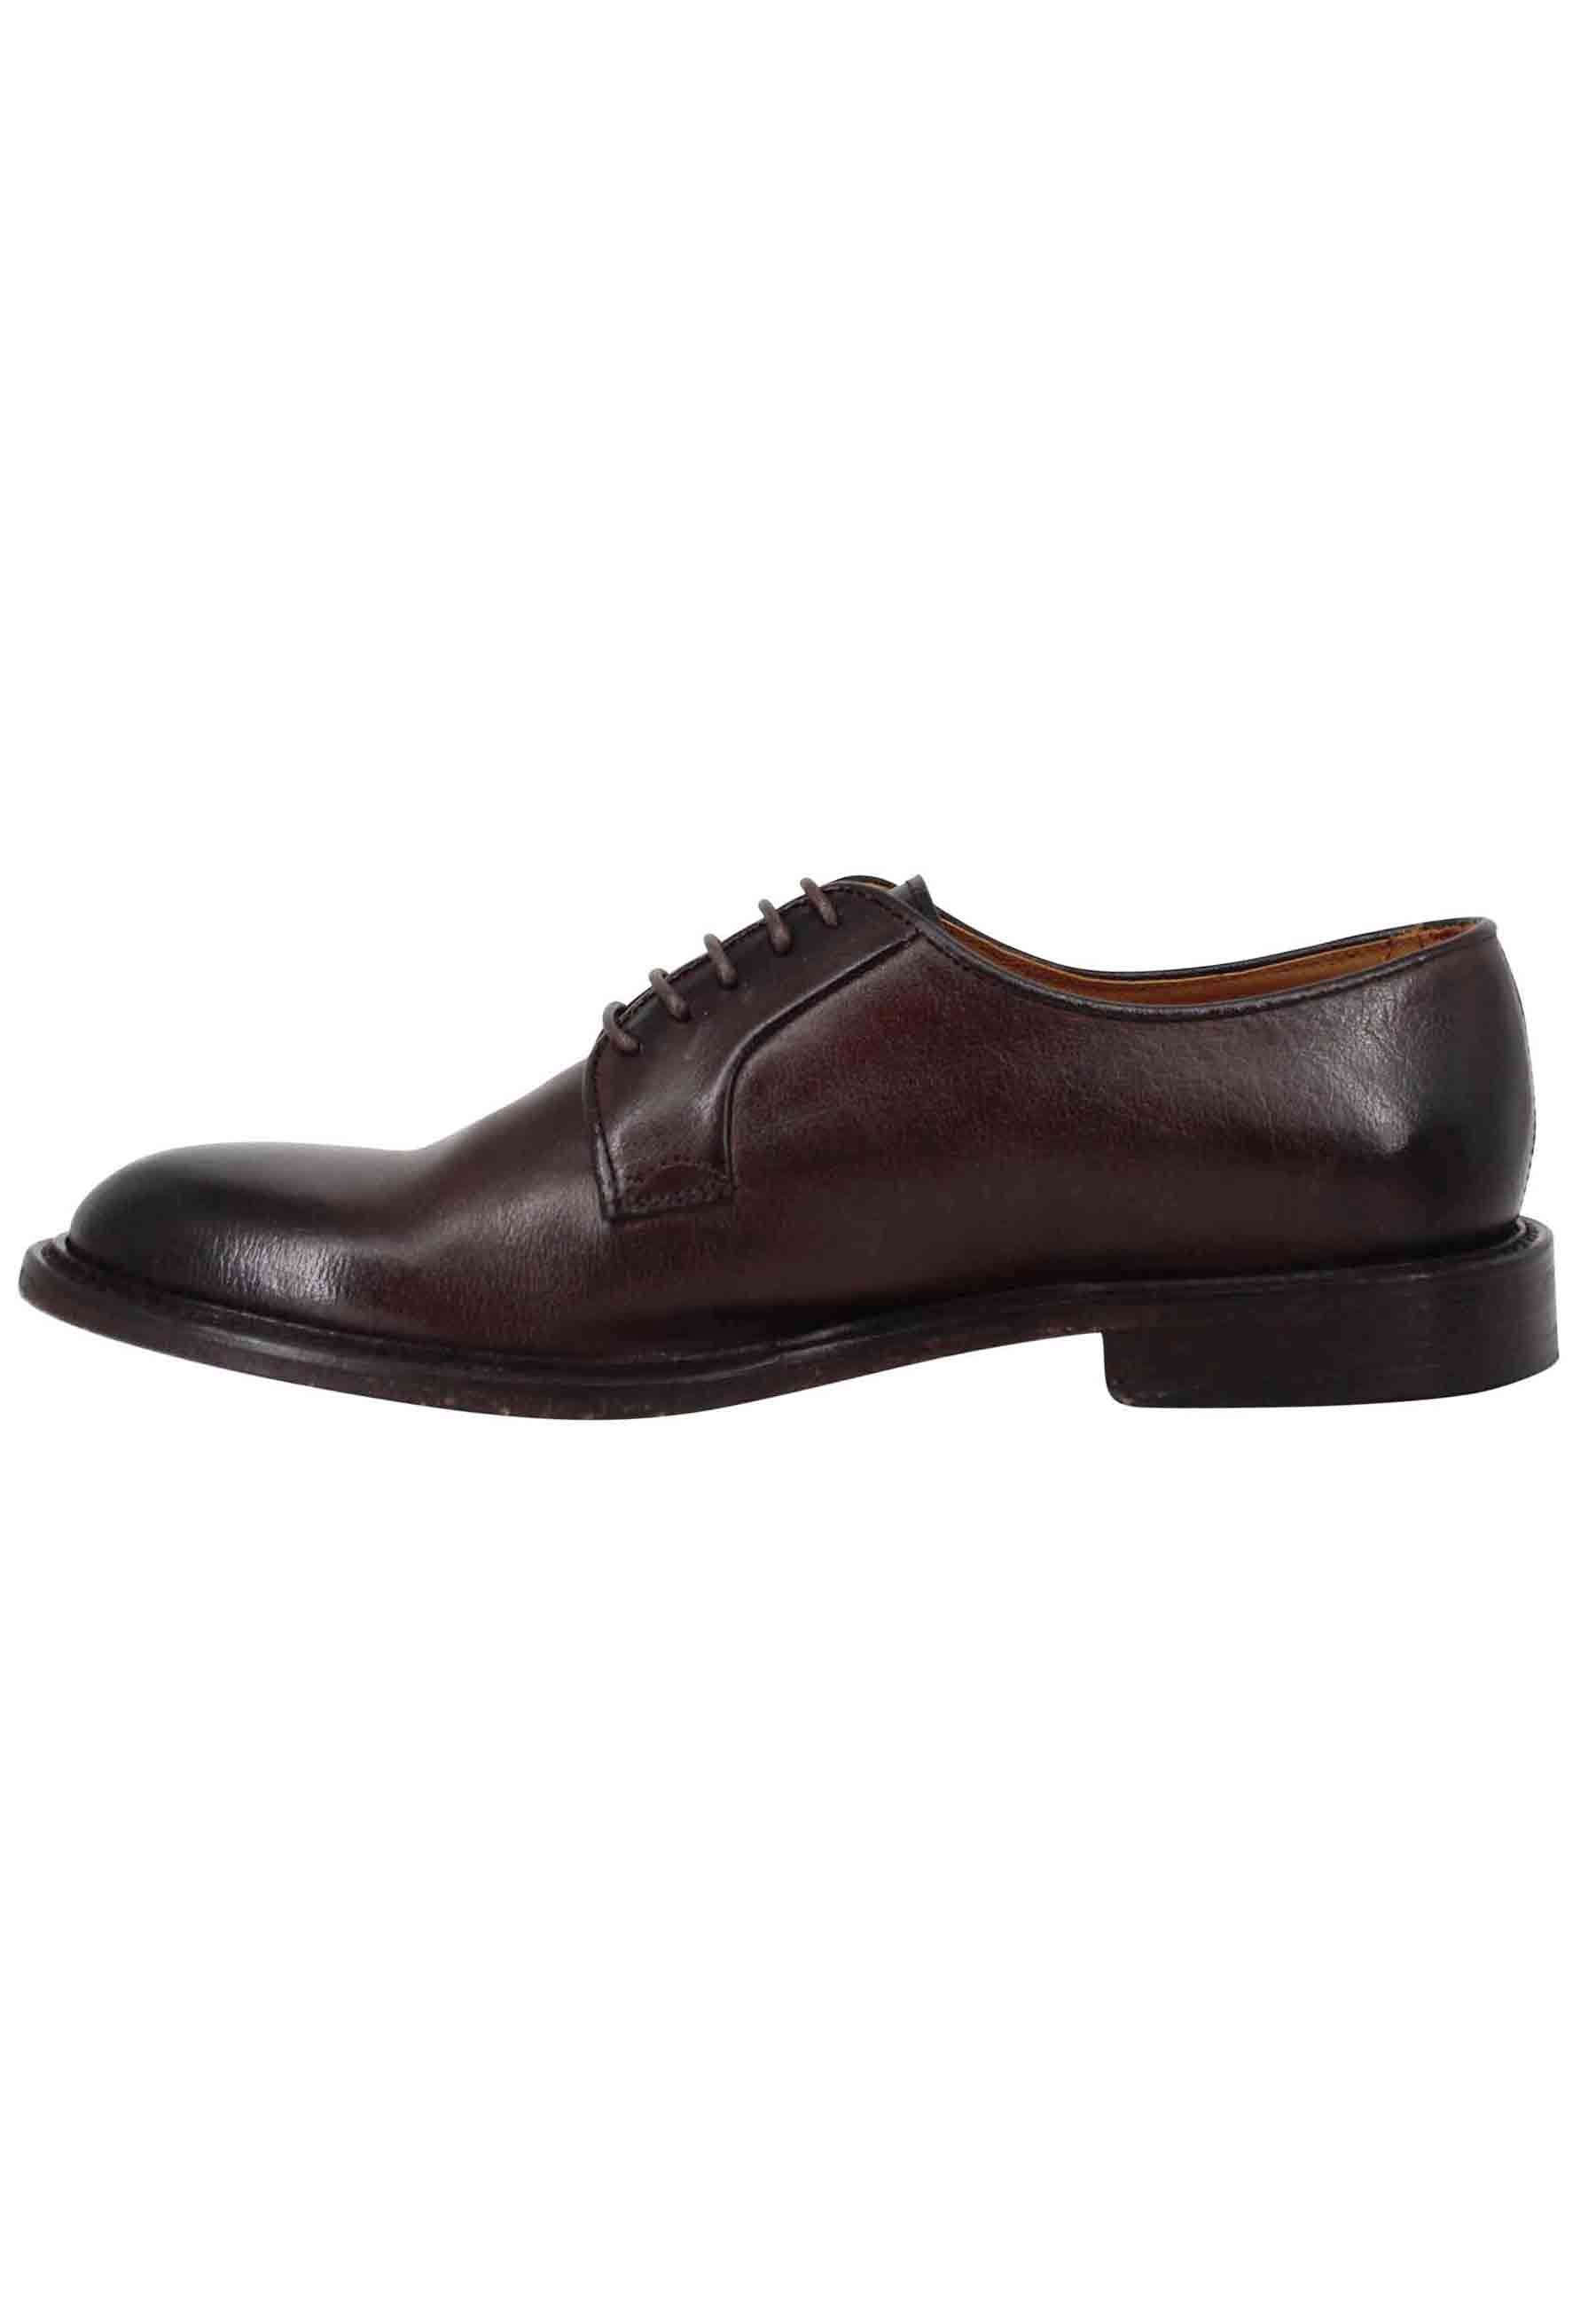 Men's lace-ups in dark brown leather with stitched leather sole